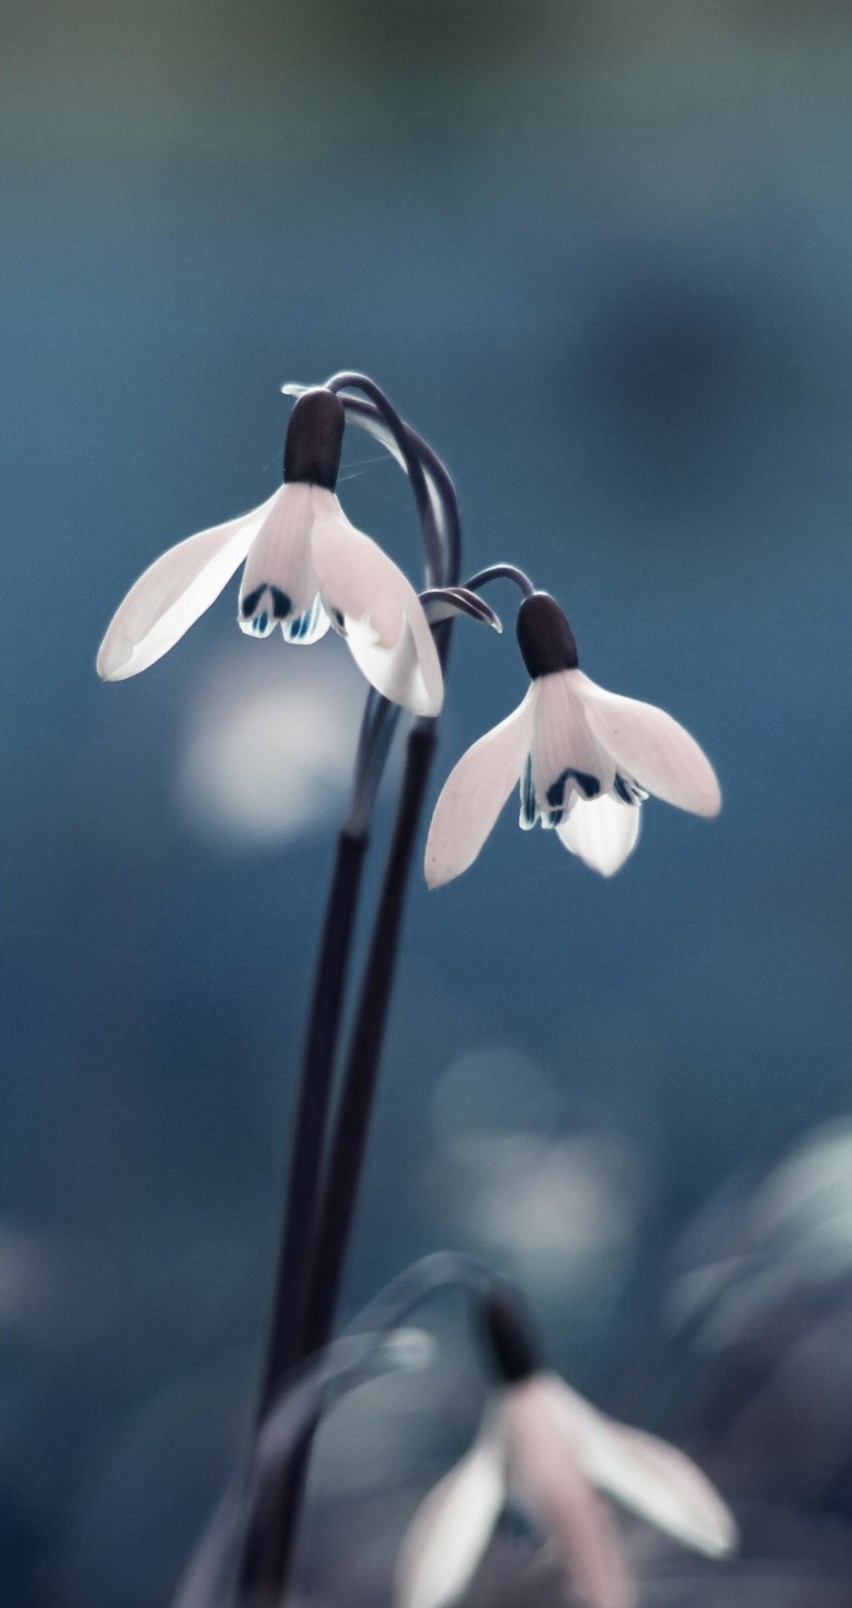 Snowdrop "Galanthus" Wallpaper for Apple iPhone 6 / 6s